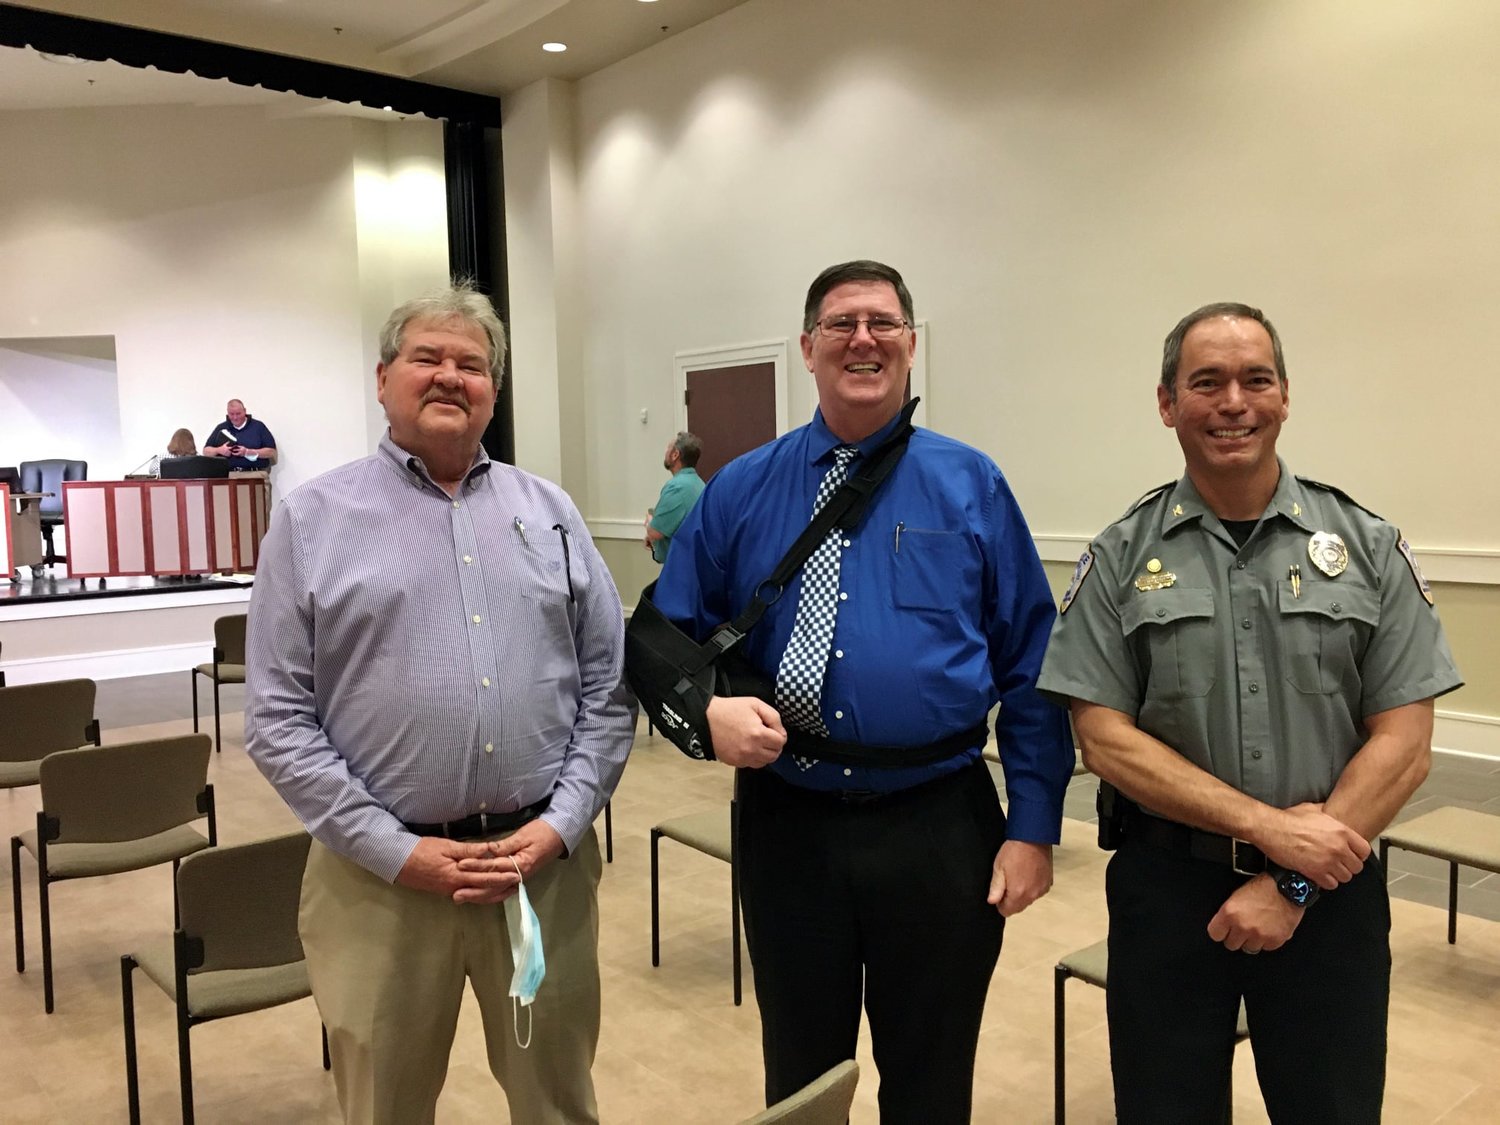 The Rev. Richard Ullo, center, was named the first chaplain of the Spanish Fort Police Department. With Ullo are Mayor Mike McMillan and Police Chief John Barber.